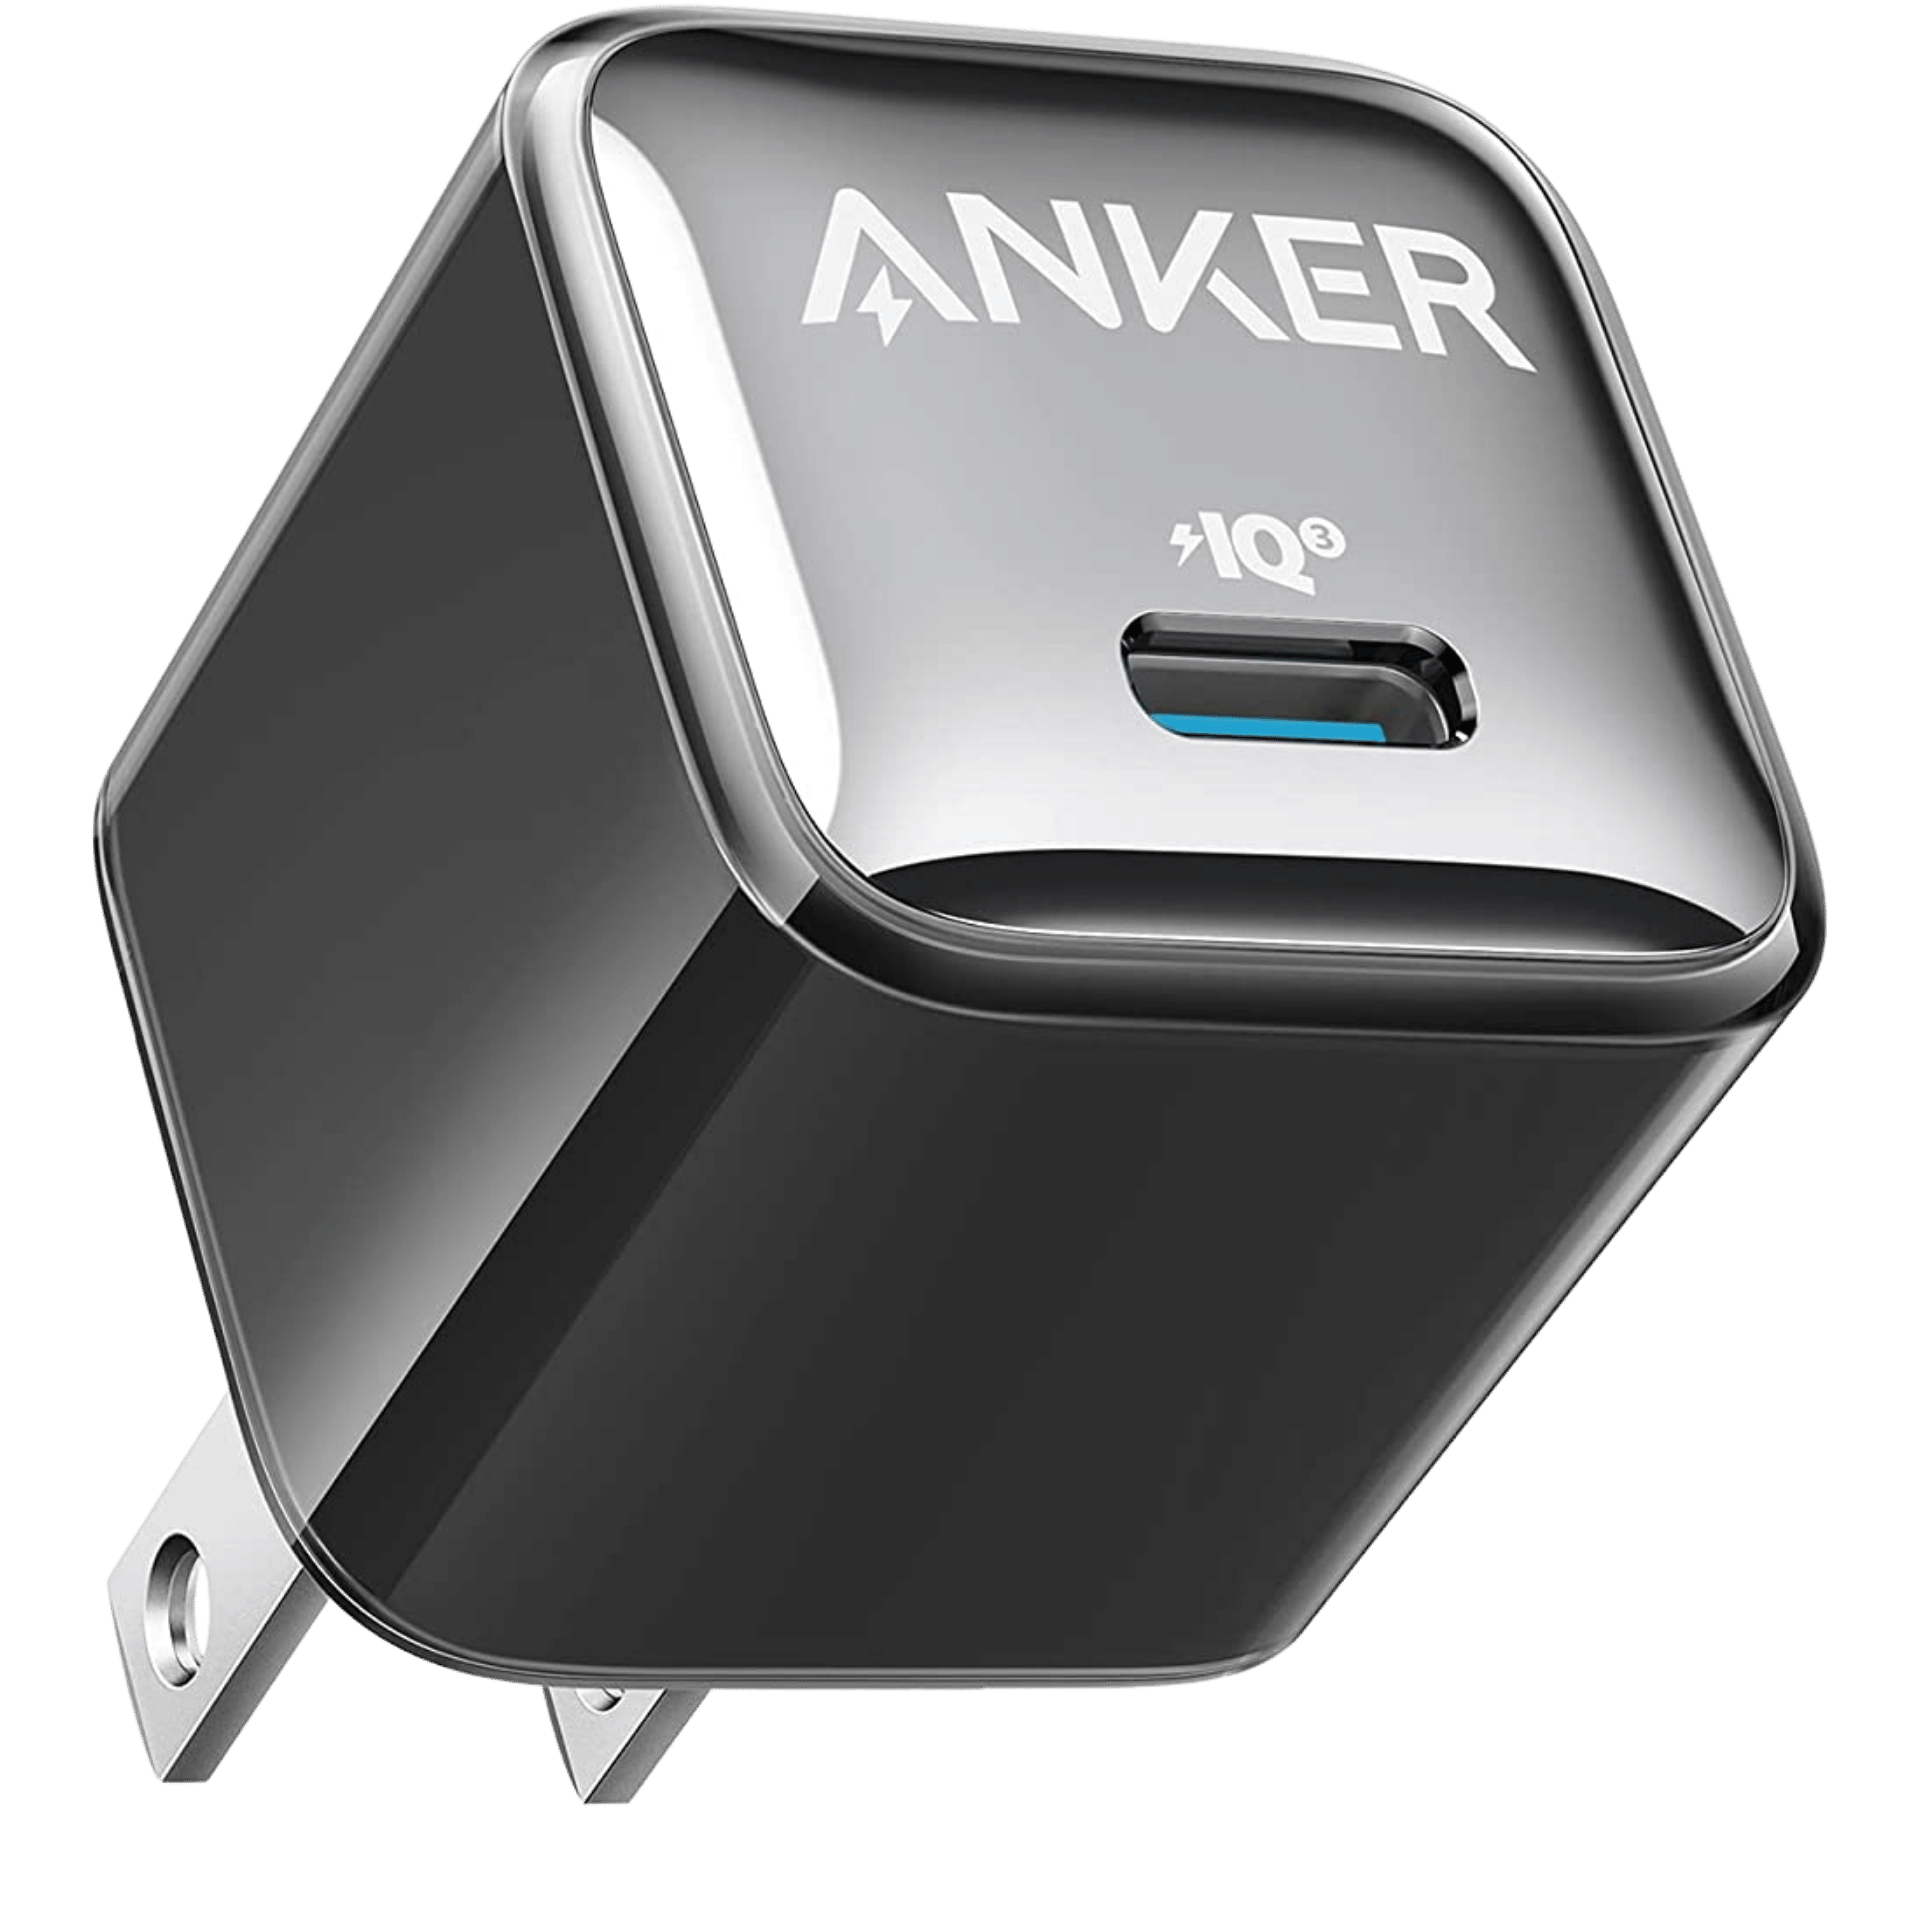 Product Image for Anker Nano Pro 20W USB C Charger